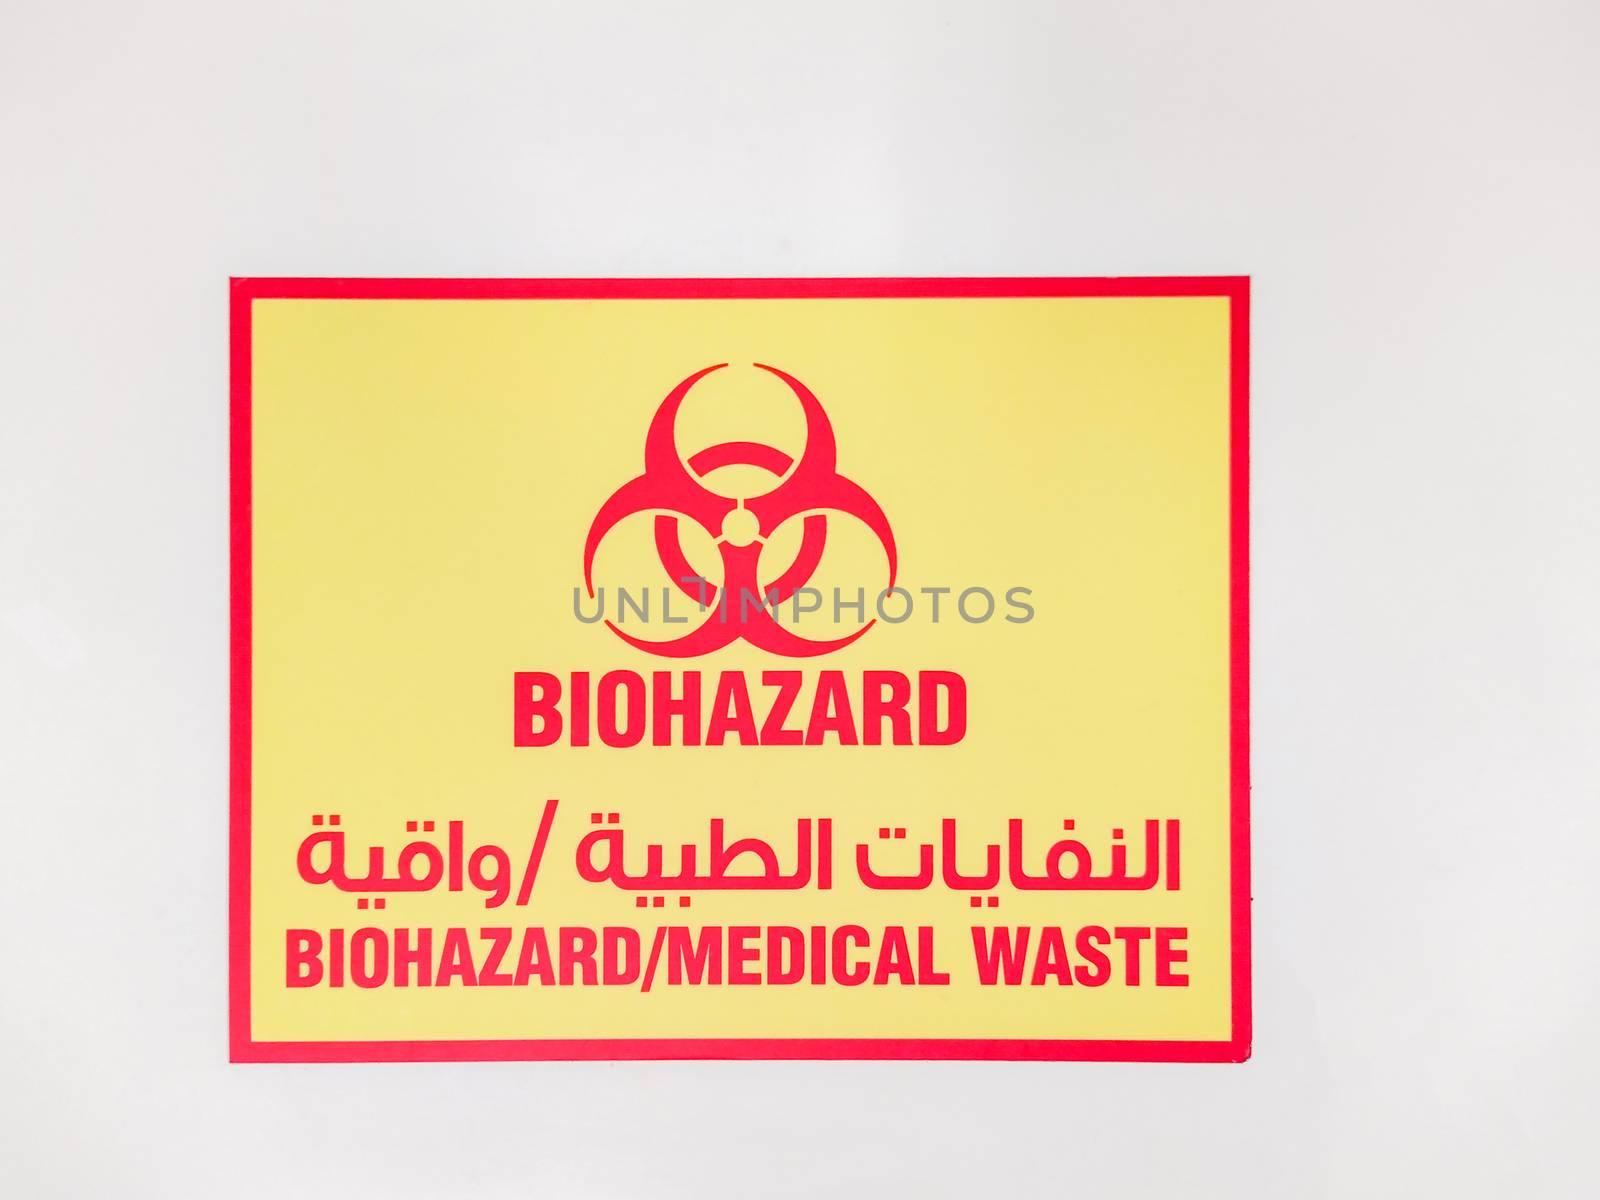 Sign for Biohazard medical waste. Arabic writing can read Biohazard medical waste. Concept of biohazard in middle east and arabic speaking countries